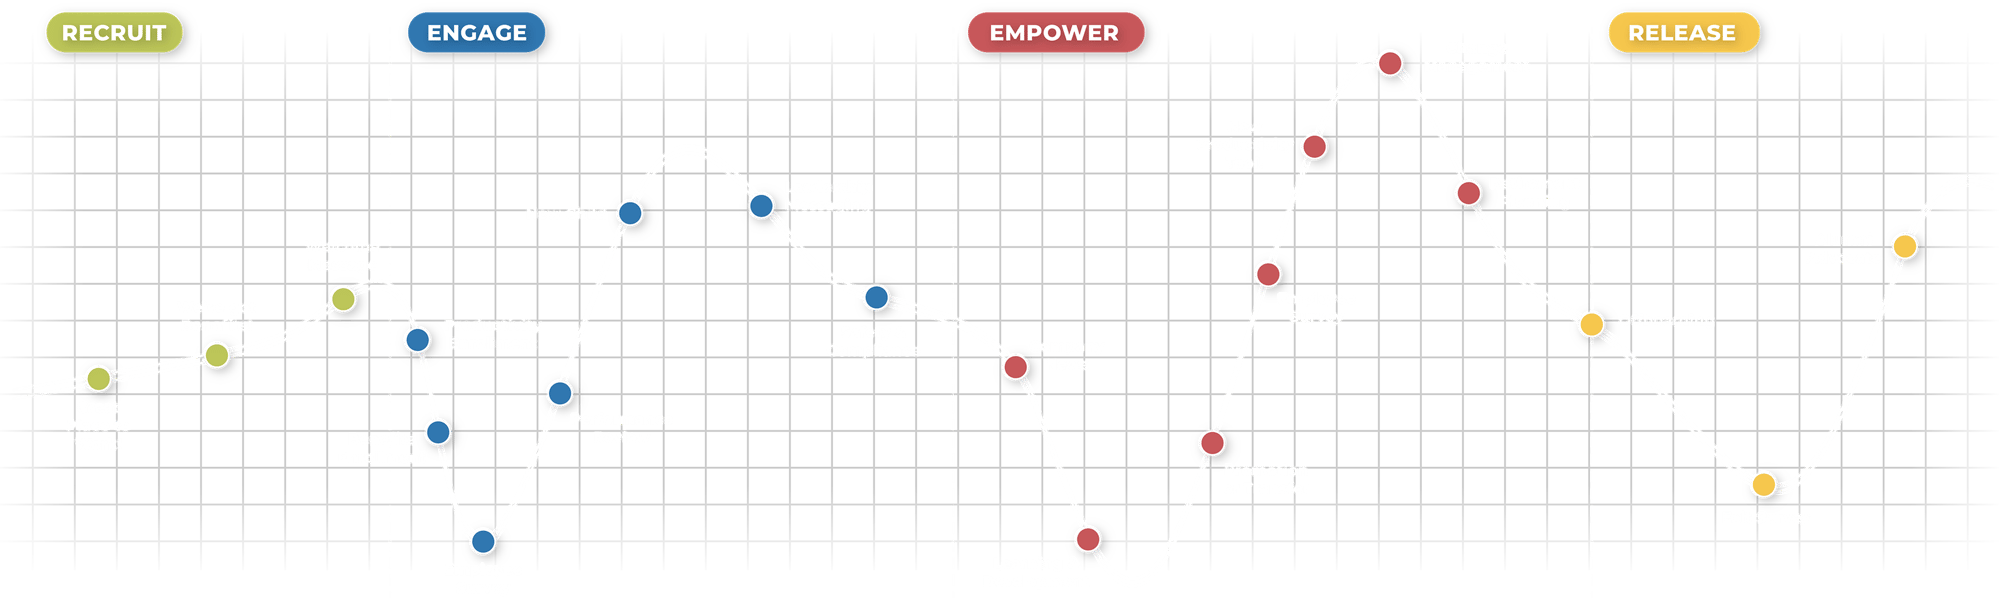 connect journey